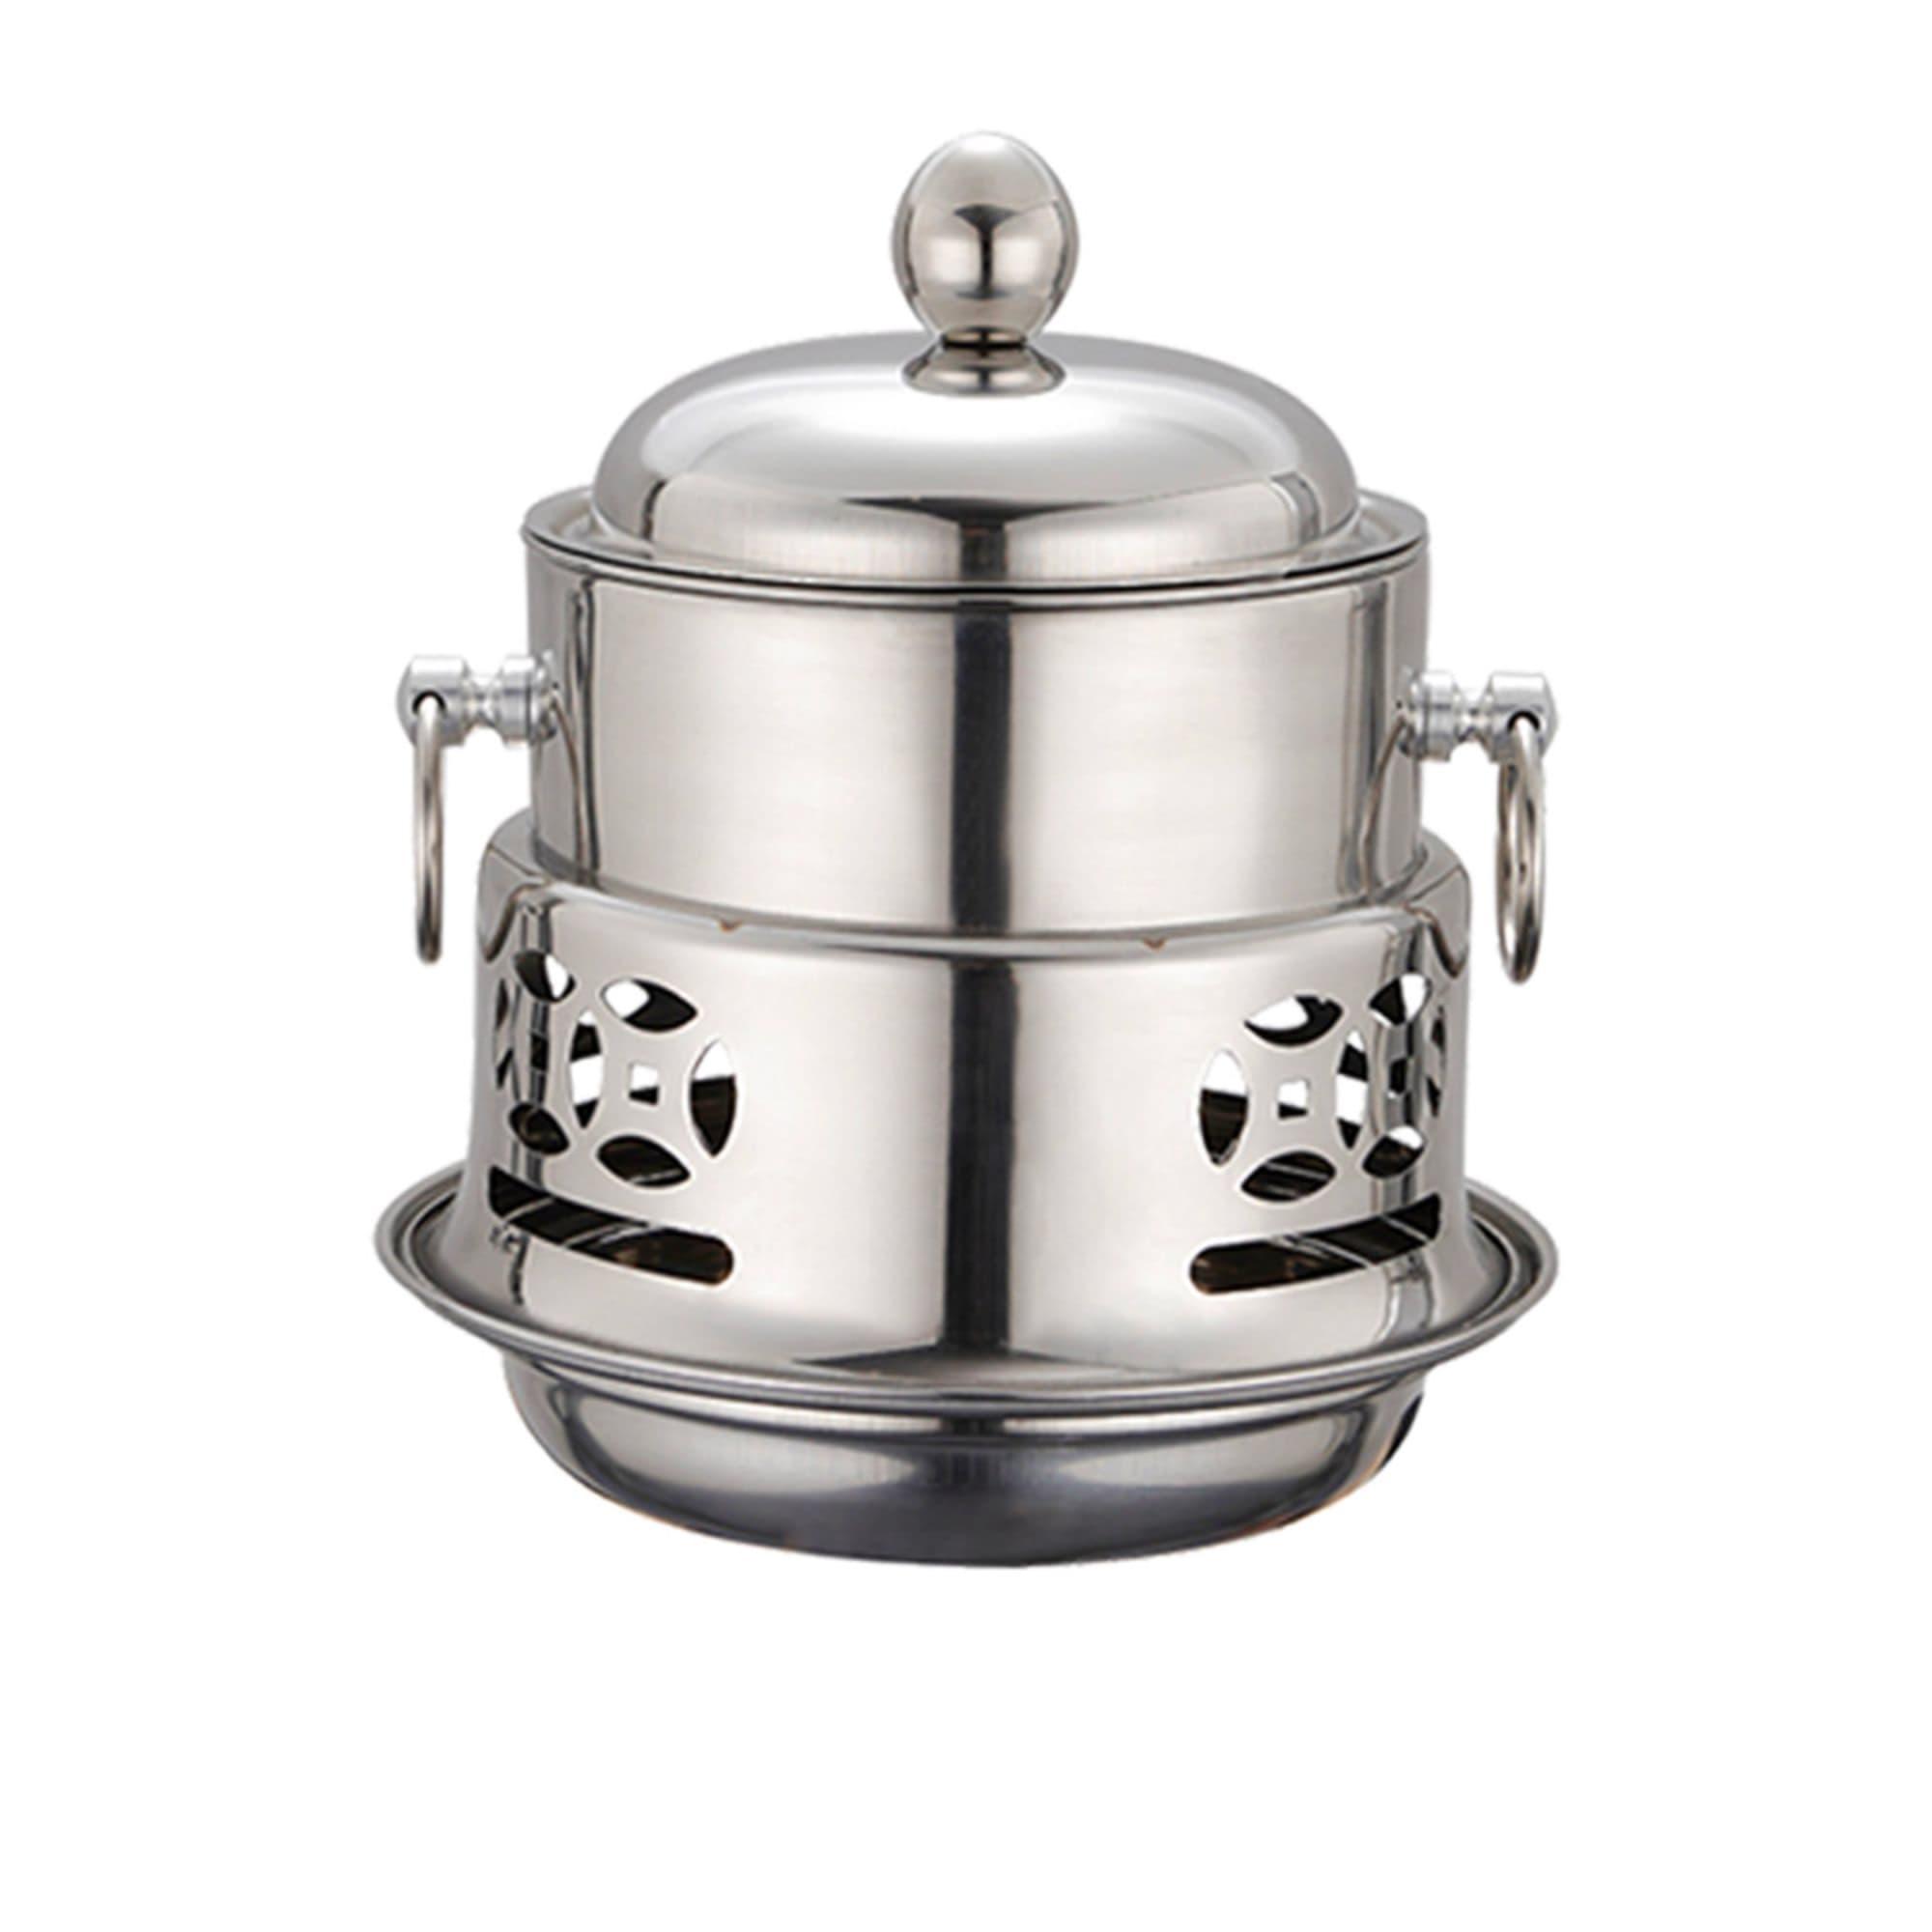 Soga Round Stainless Steel Single Hot Pot with Lid 20cm Image 1